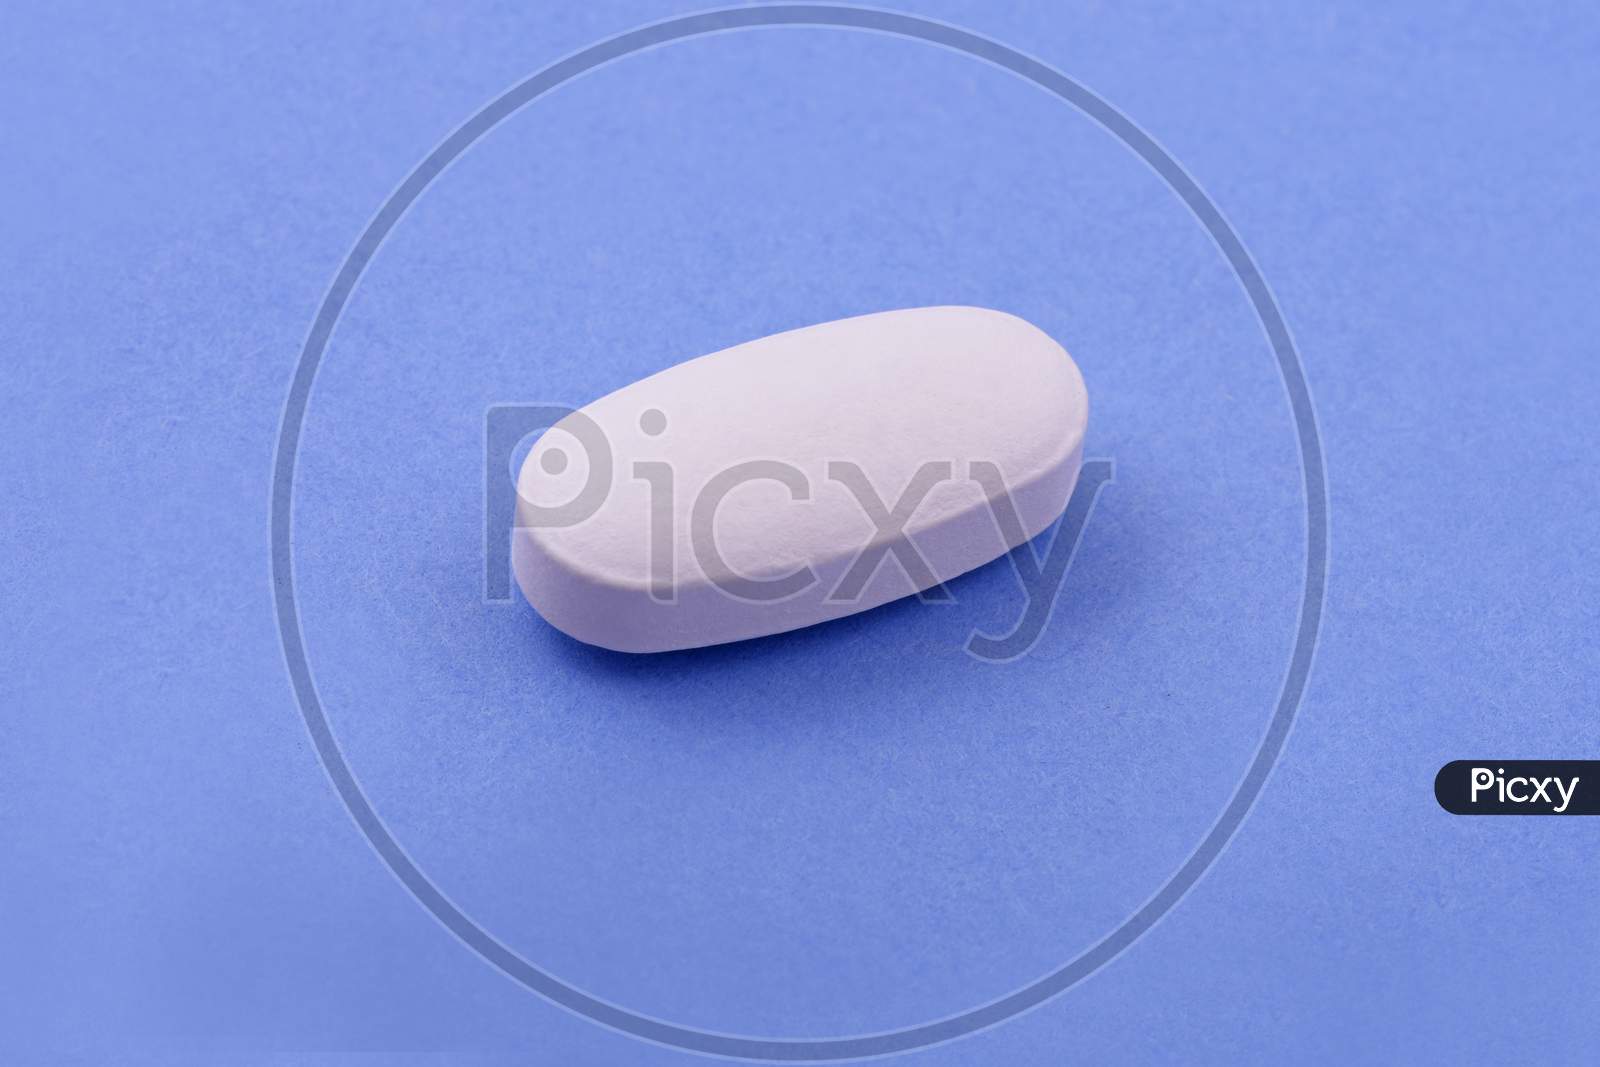 Medicine And Healthcare Concept. On A White Sheet Of Paper, Tablets, A  Marker And An Inscription - National Health Service Indicated By A Drawn  Oval. Stock Photo, Picture and Royalty Free Image.